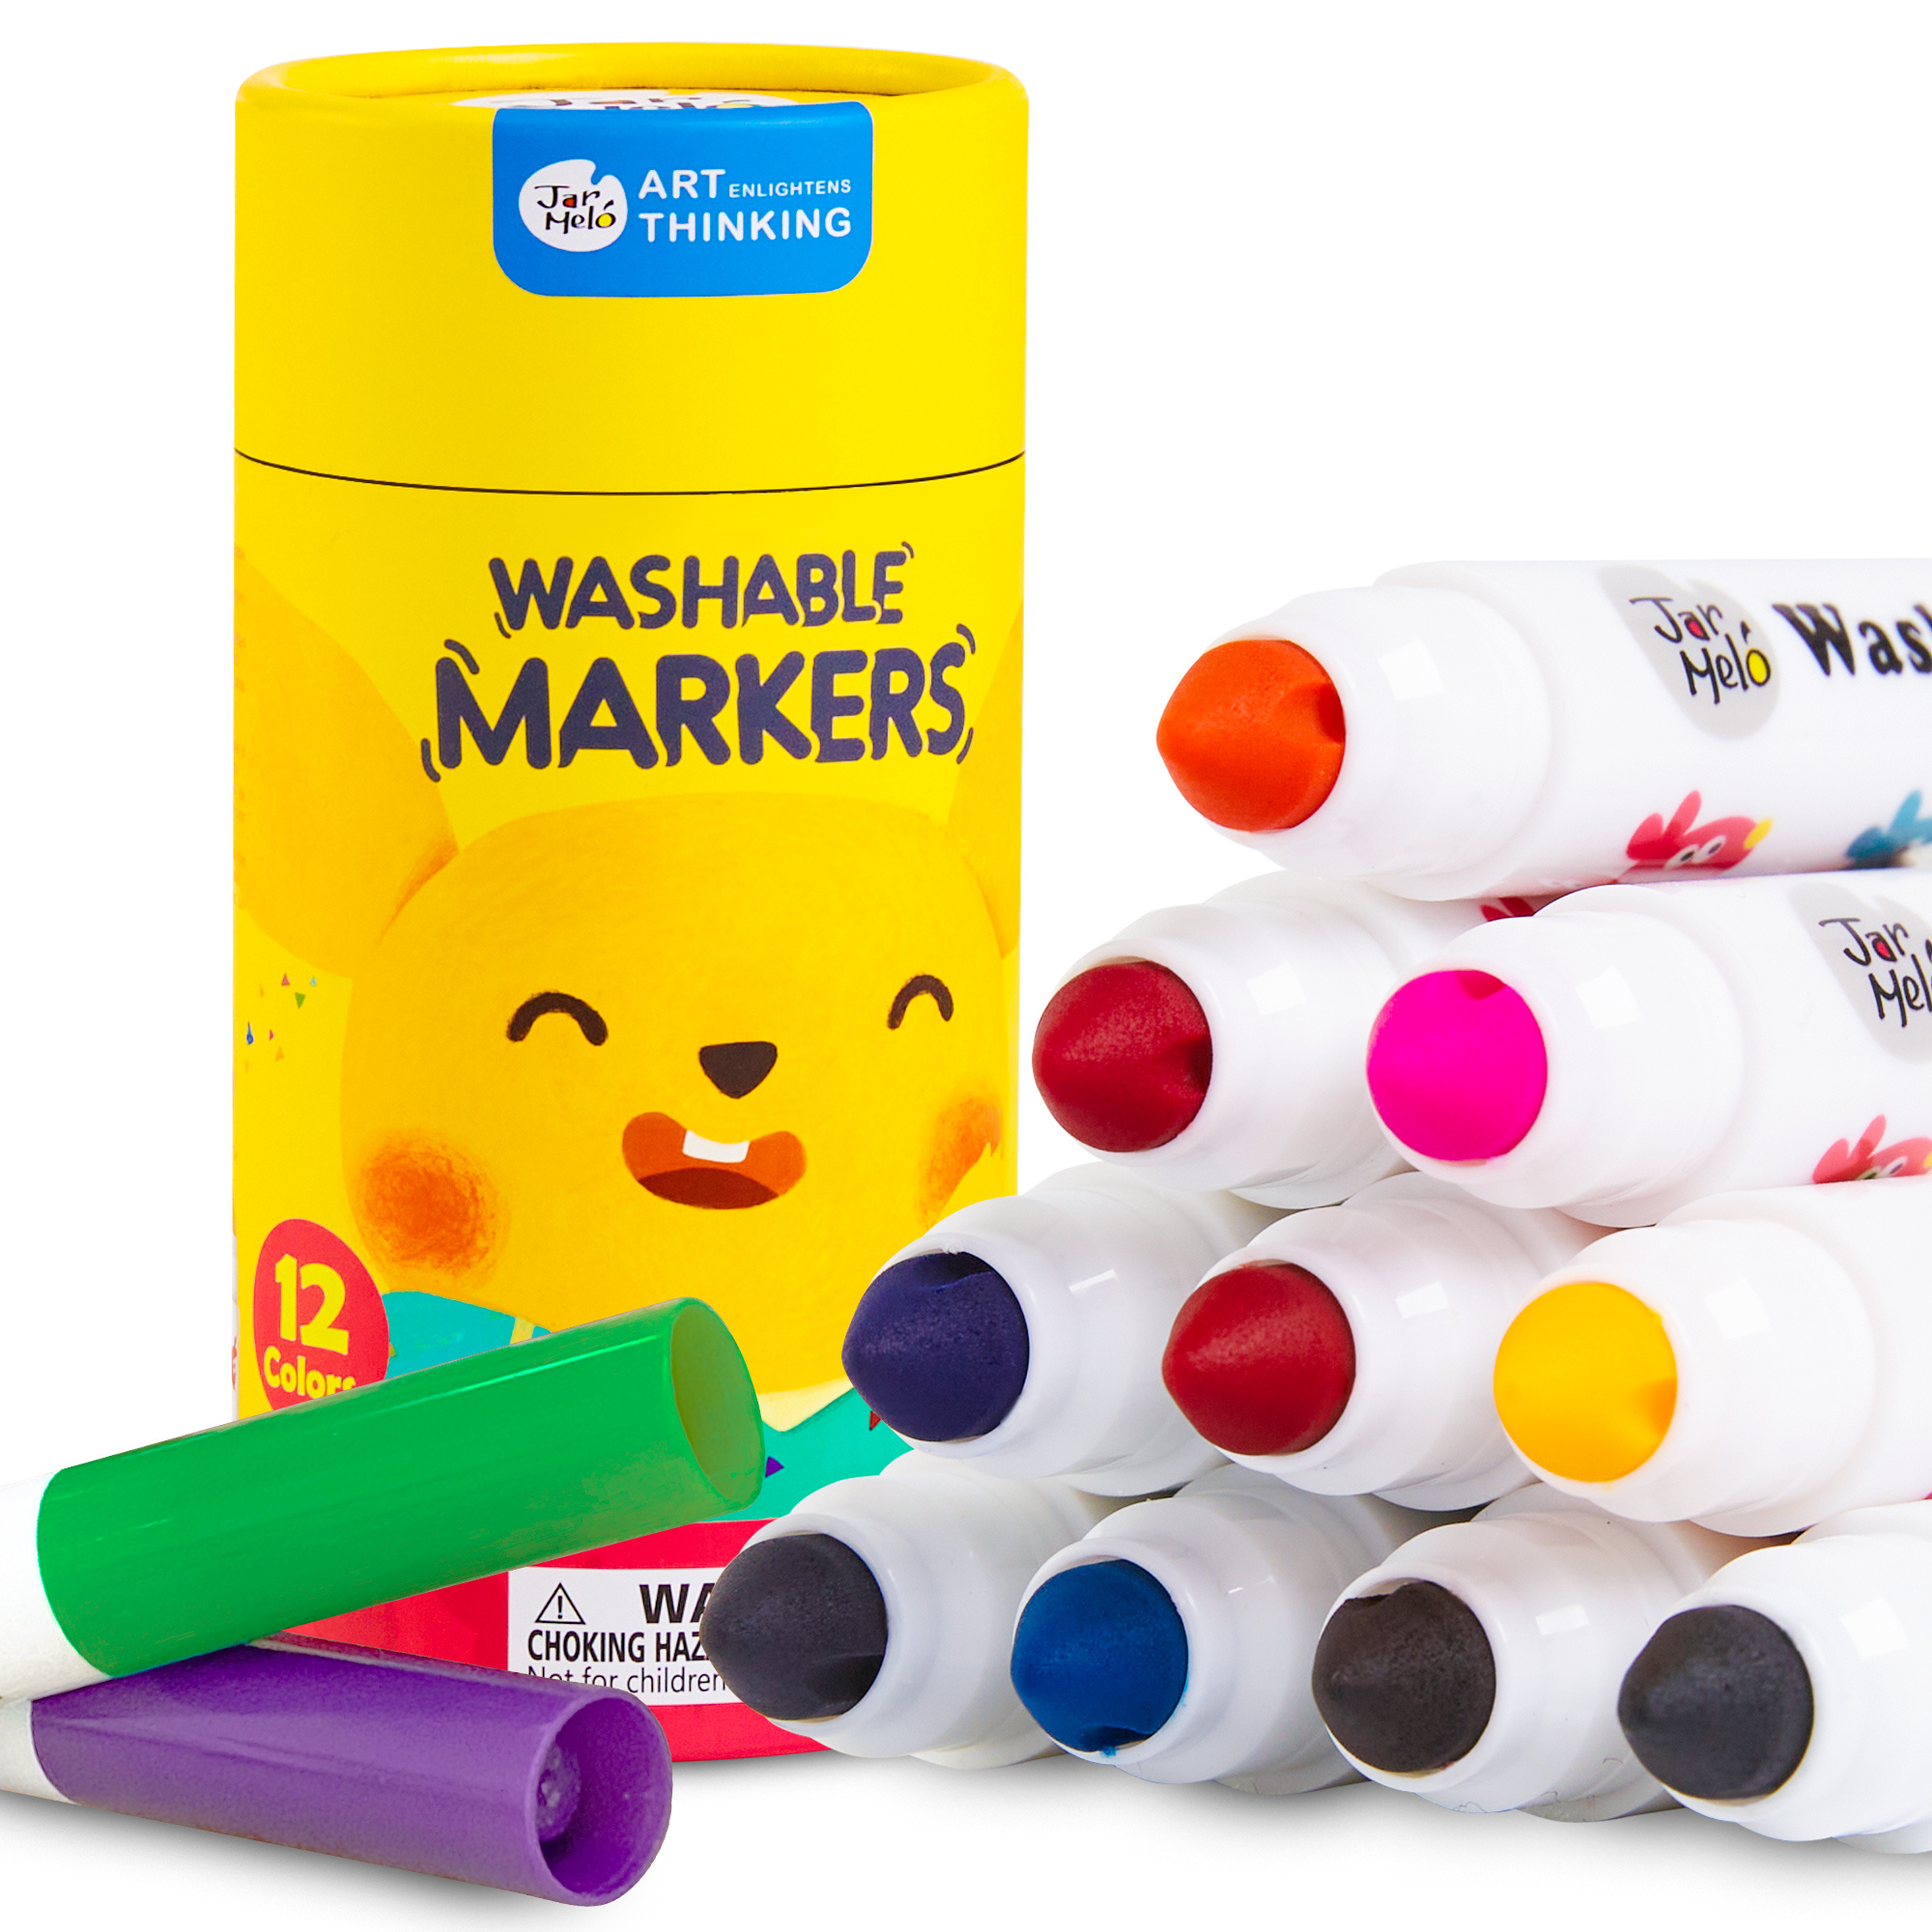  Washable Markers Set, Gift for Kids, 36 Colors Marker Pen Set, ages 2-4,4-8 years : Toys & Games